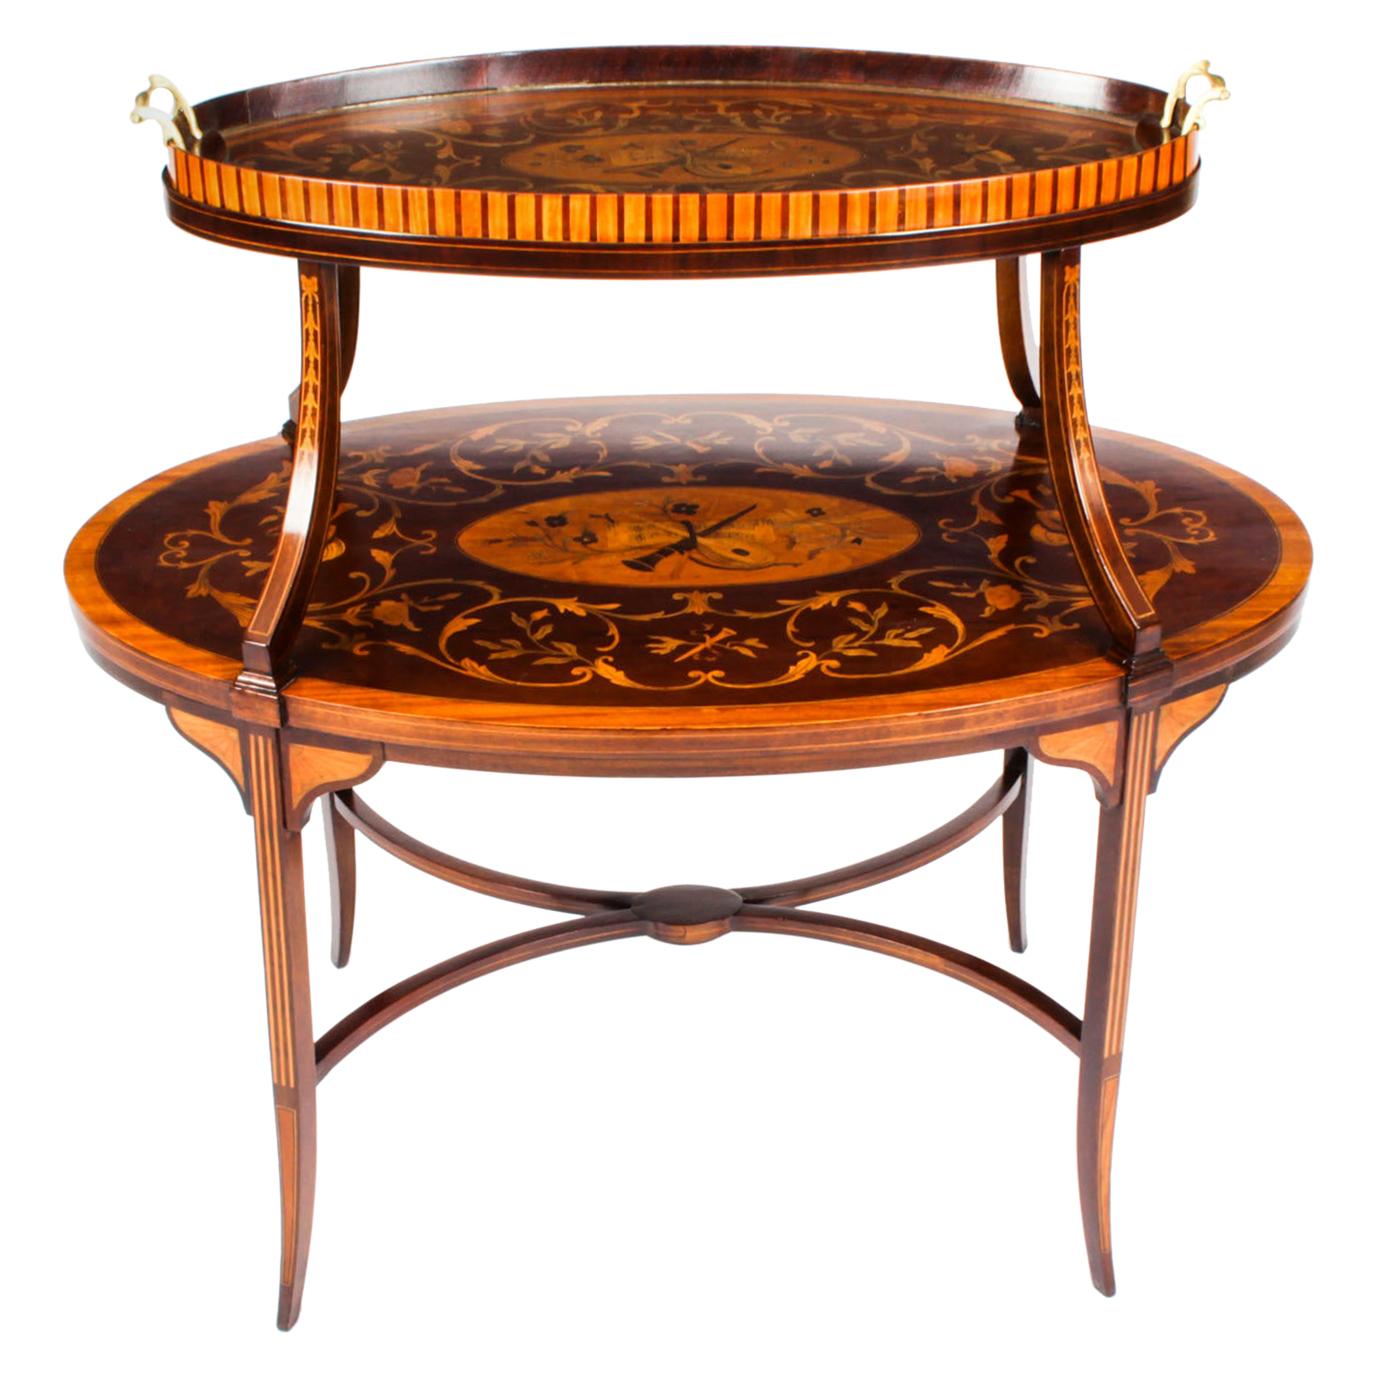 Antique English Marquetry Etagere Tray Table, 19th Century